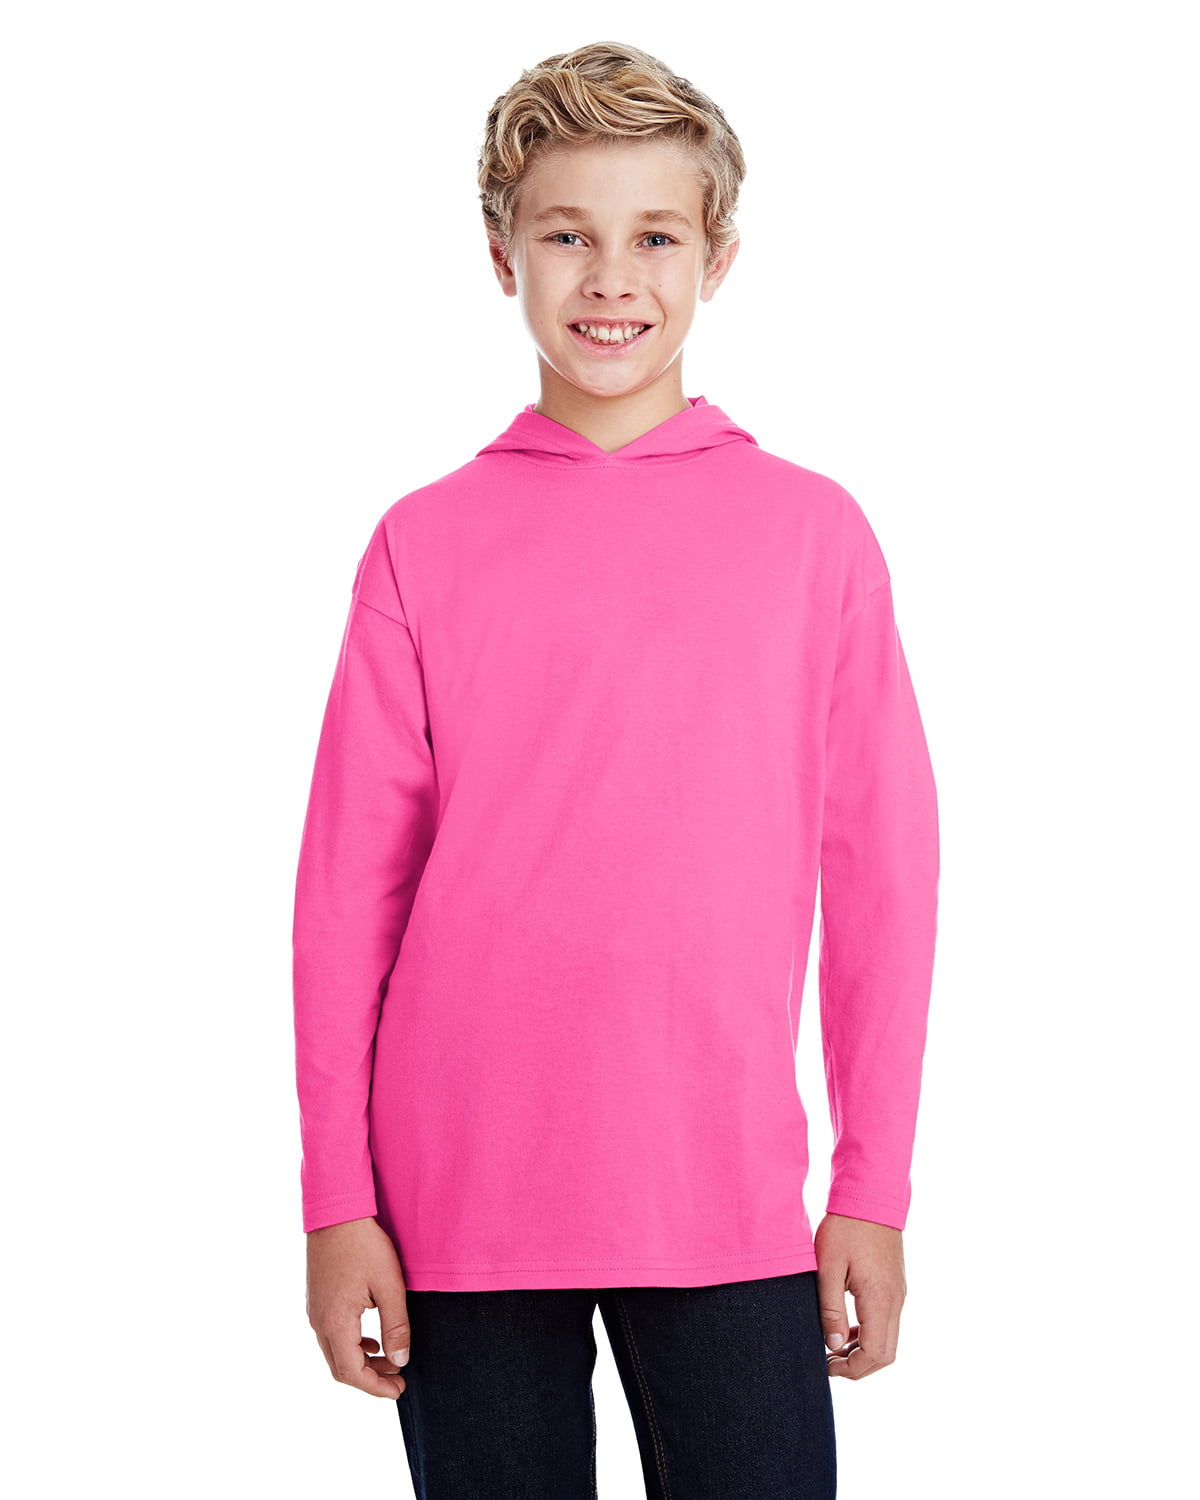 Anvil - The Anvil Youth Long-Sleeve Hooded T-Shirt - HOT PINK - S ...